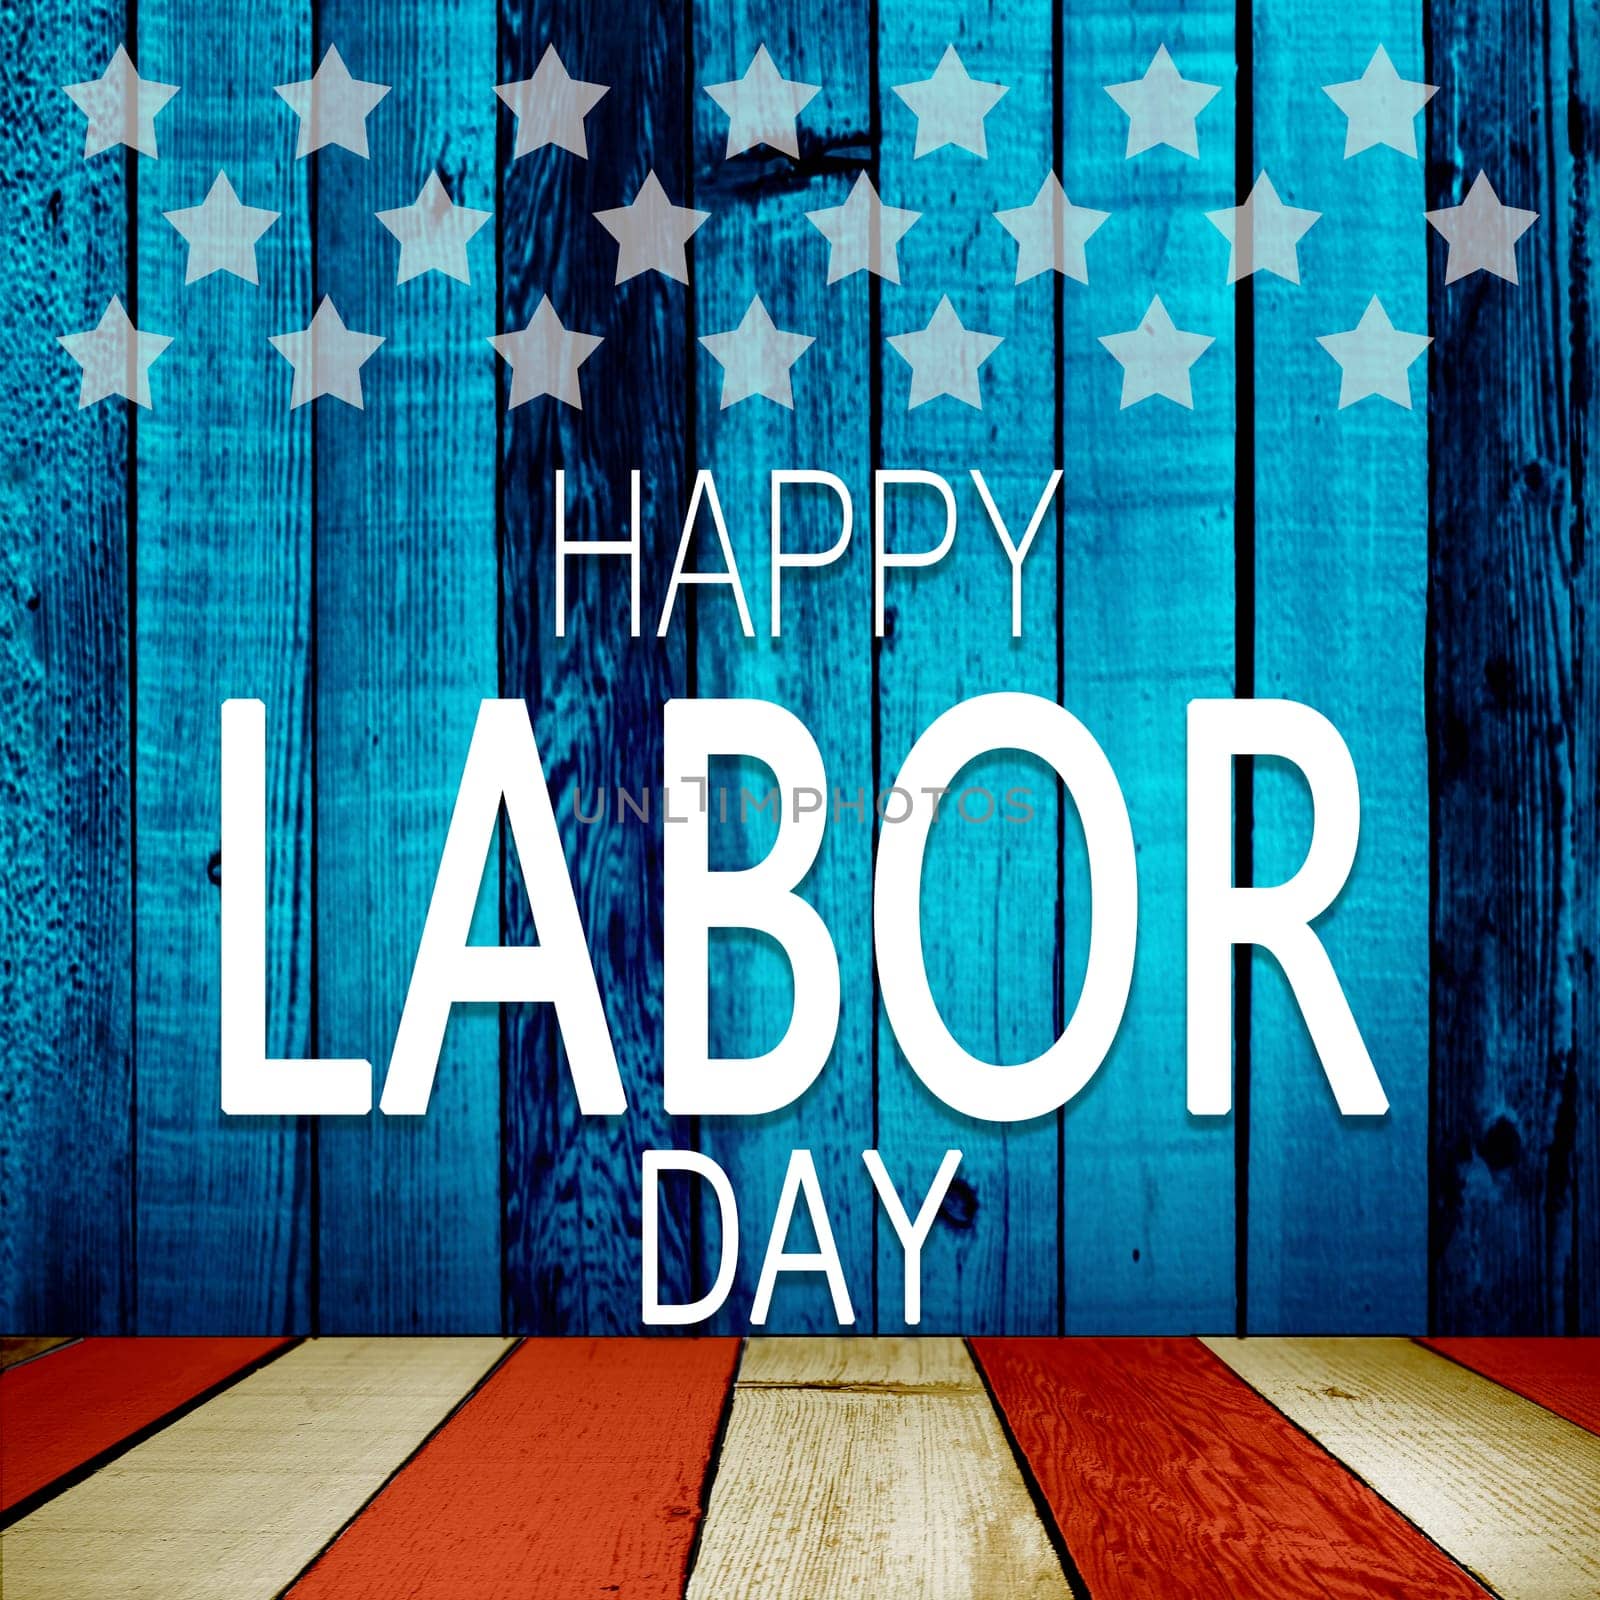 Happy Labor day banner, american patriotic background by Fabrikasimf